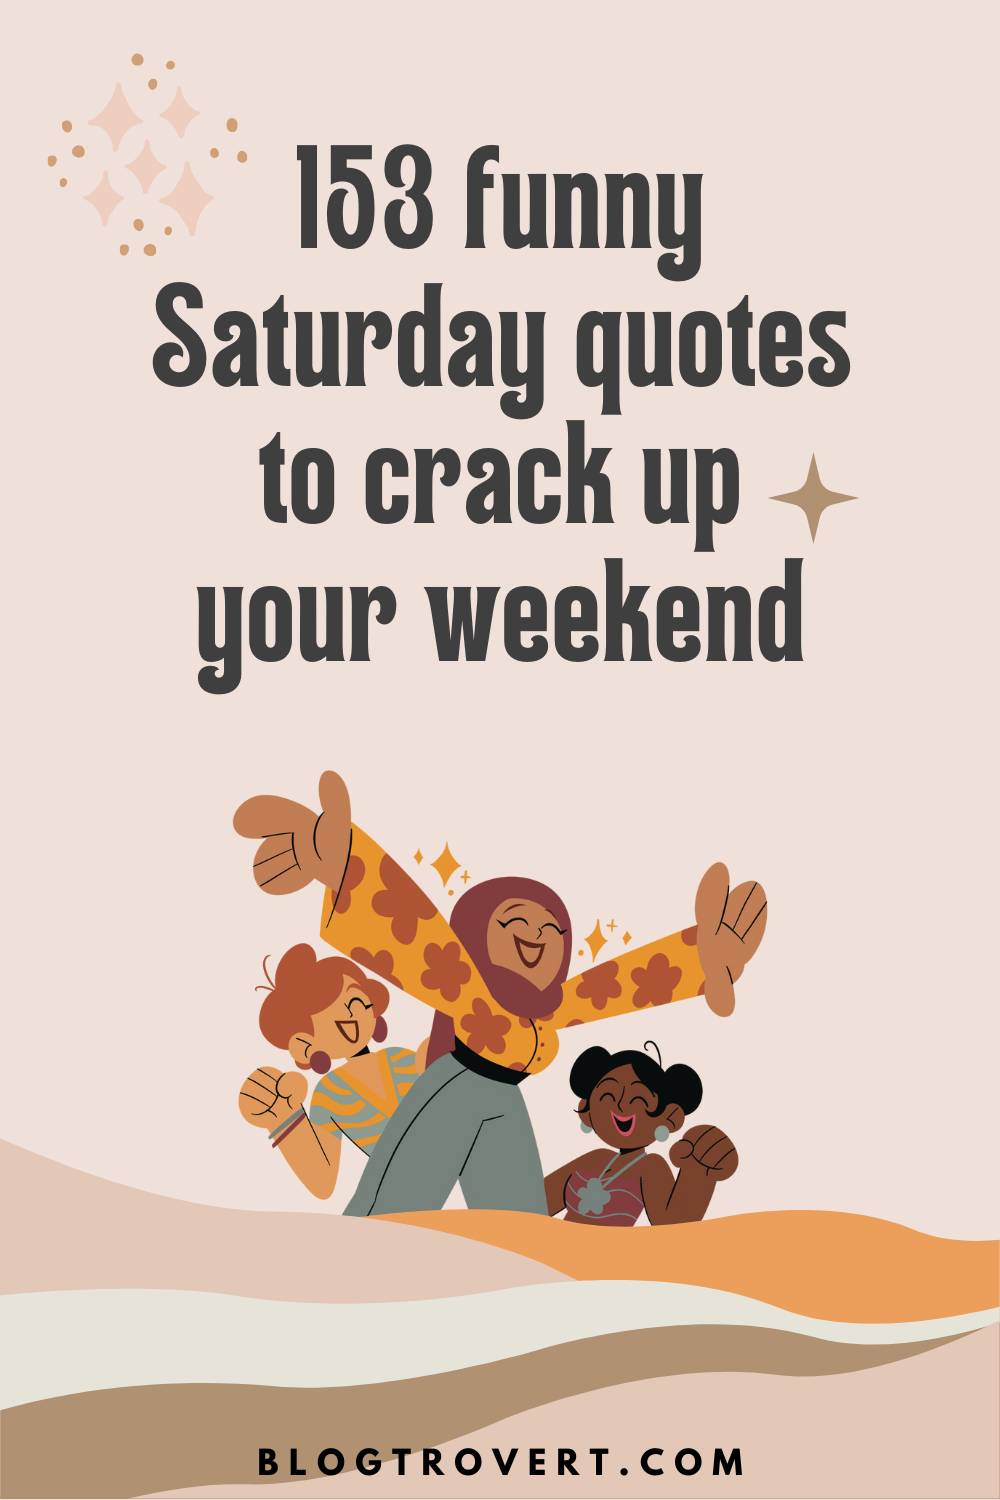 153 funny Saturday quotes to crack up your weekend 2